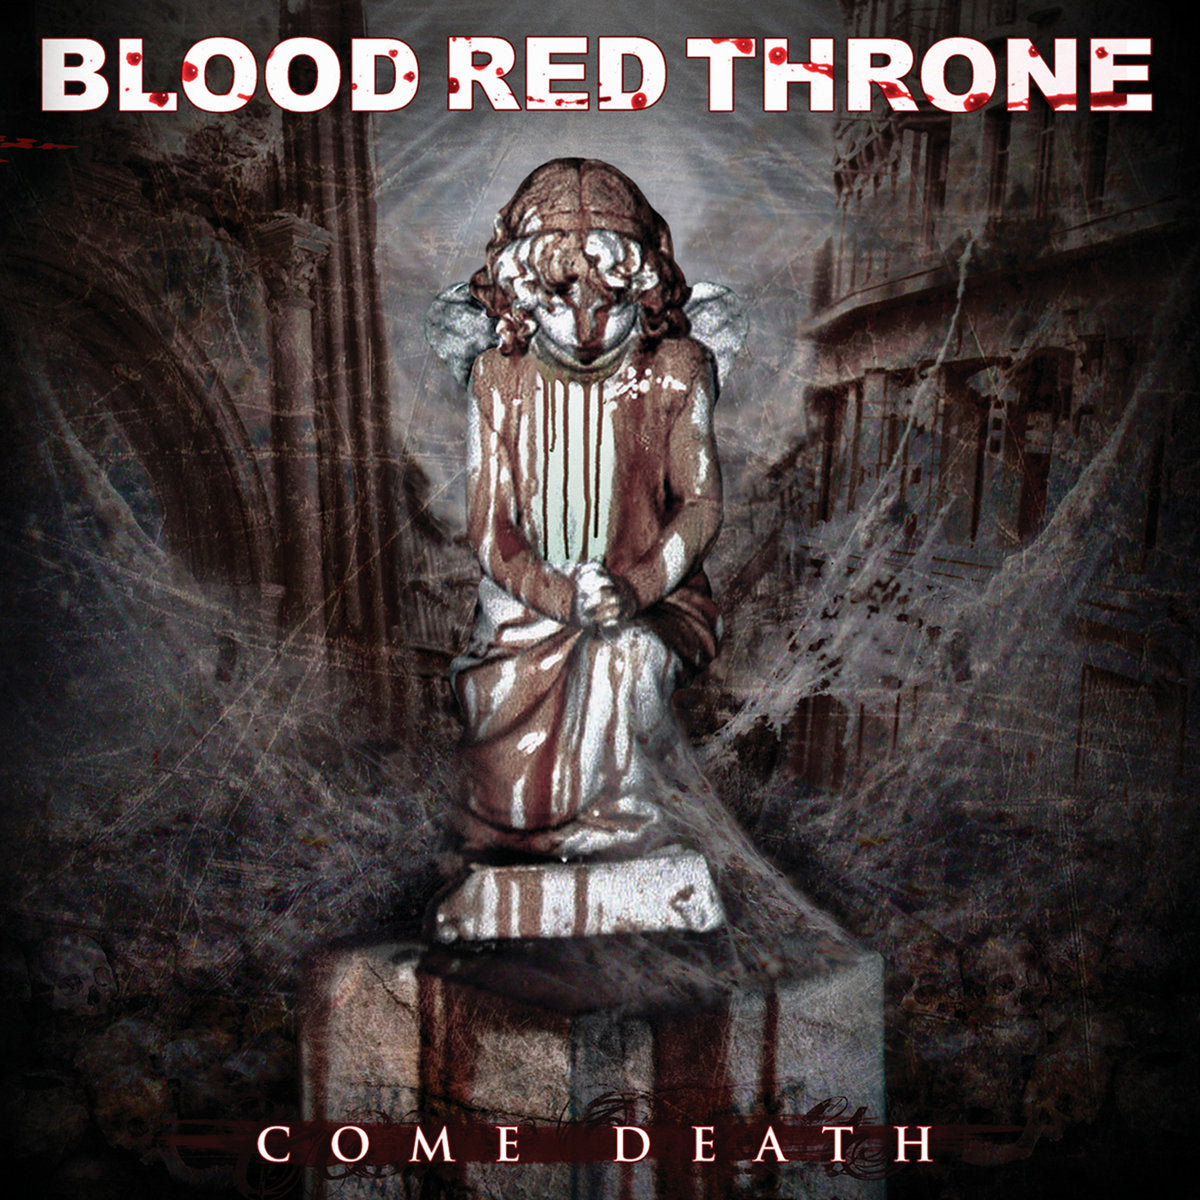 Blood Red Throne "Come Death" Digipak CD